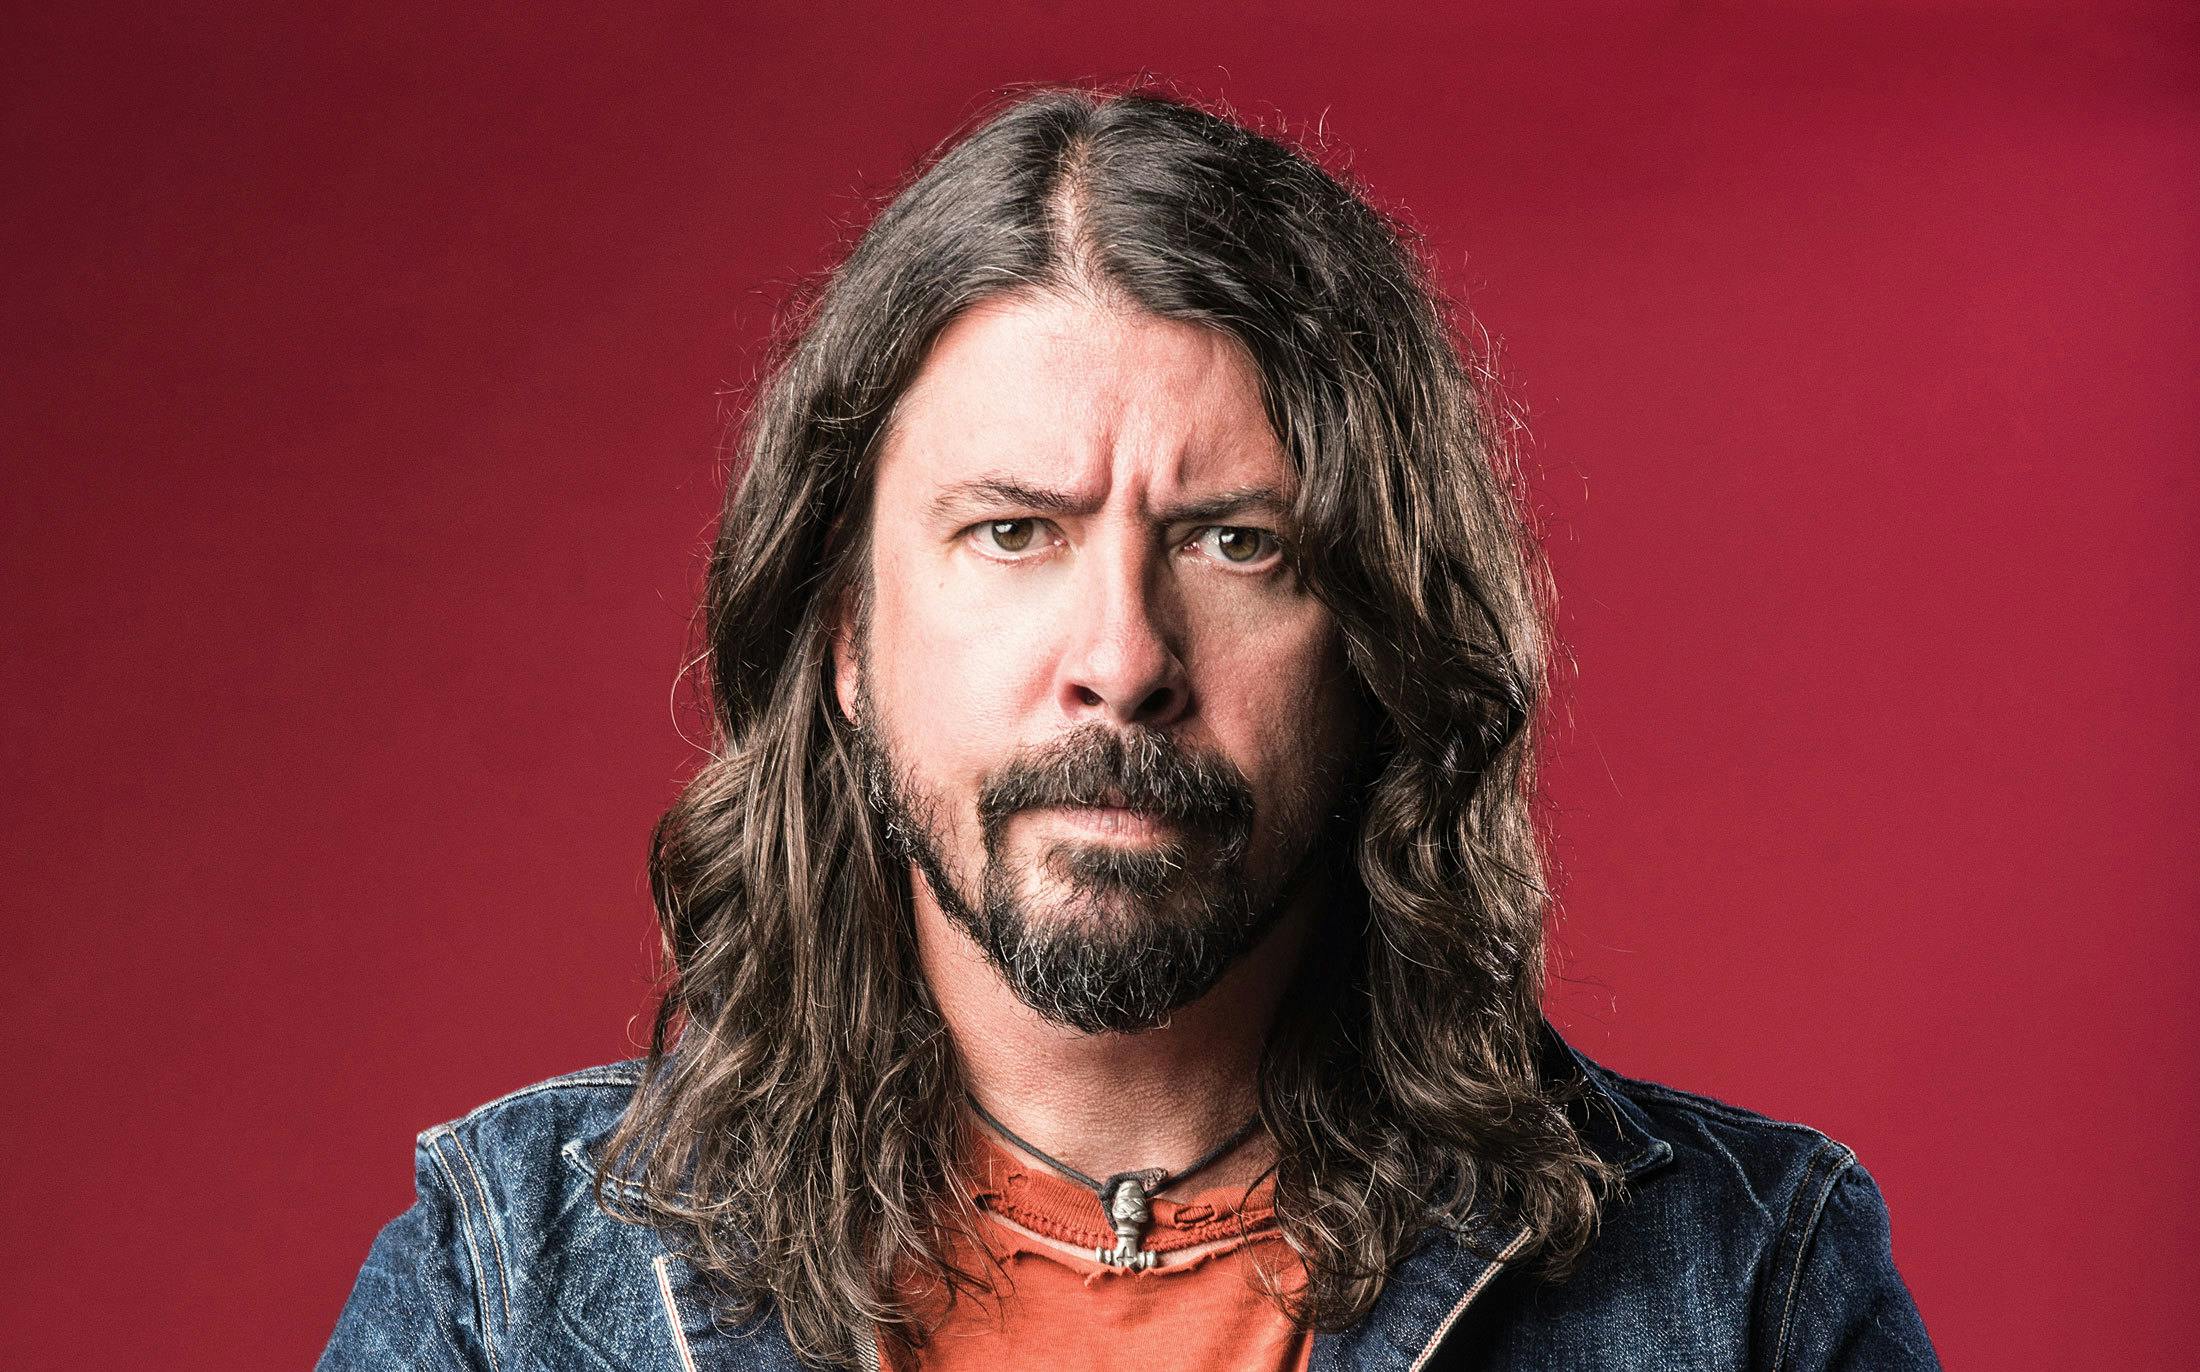 Dave Grohl Explains Why He Doesn't Have Any Personal Social Media Accounts